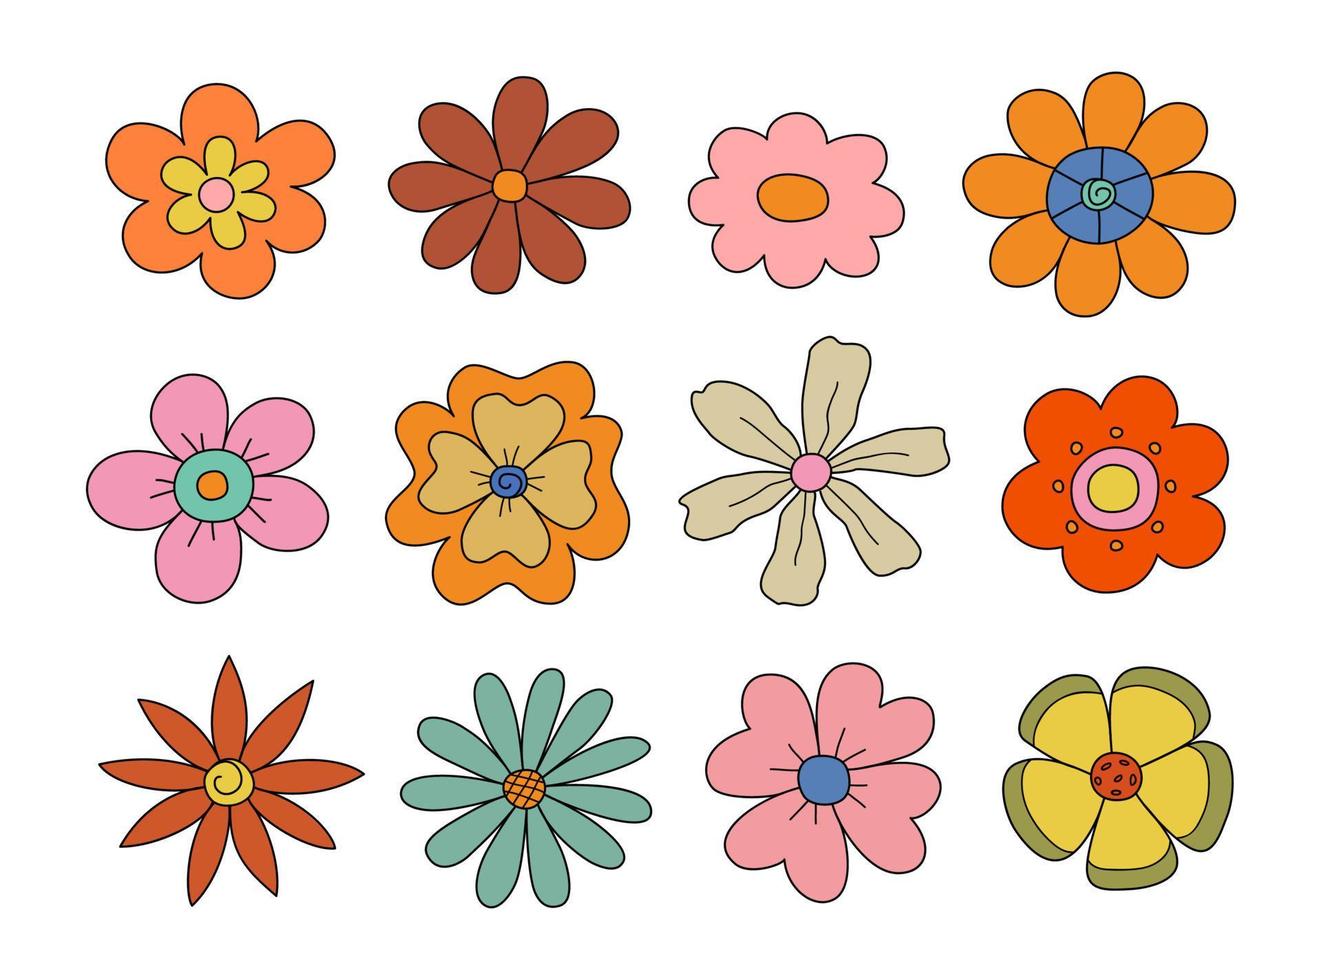 1970 daisy flowers. Collection of different retro flowers. Vector illustration isolated on a white background.